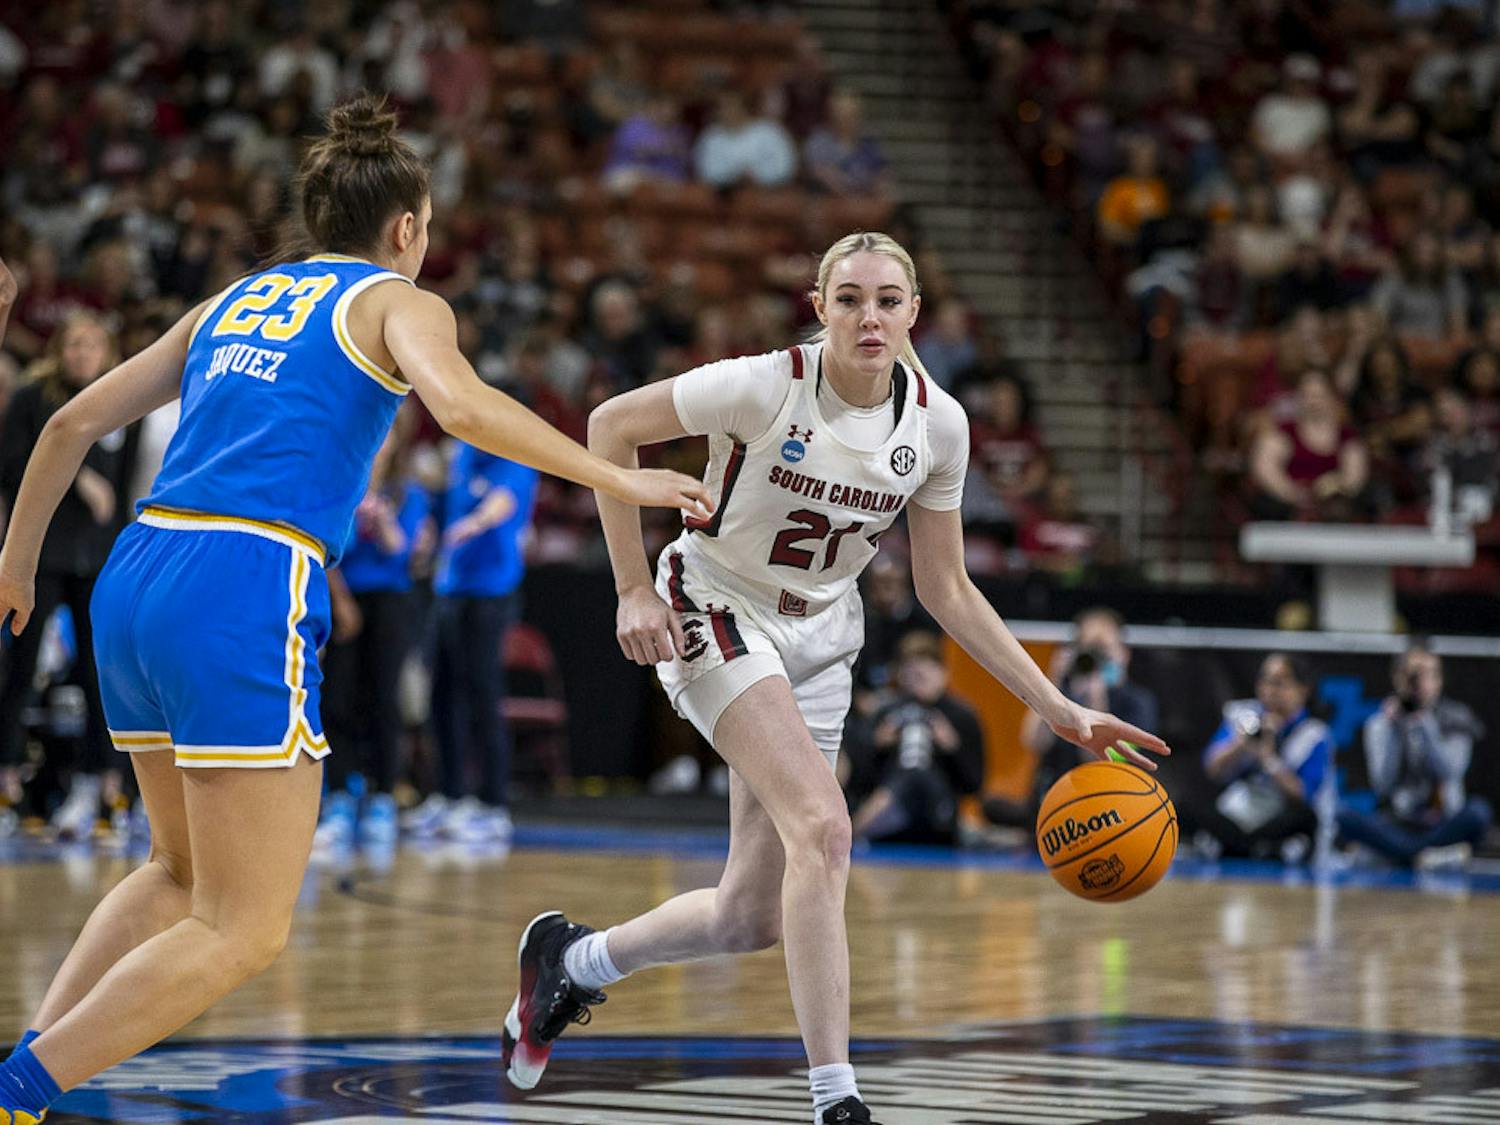 Freshman forward Chloe Kitts attempt to outmaneuver UCLA freshman forward Gabriela Jaquez during the matchup between South Carolina and UCLA at Bon Secours Arena on March 25, 2023. The Gamecocks beat the Bruins 59-43.